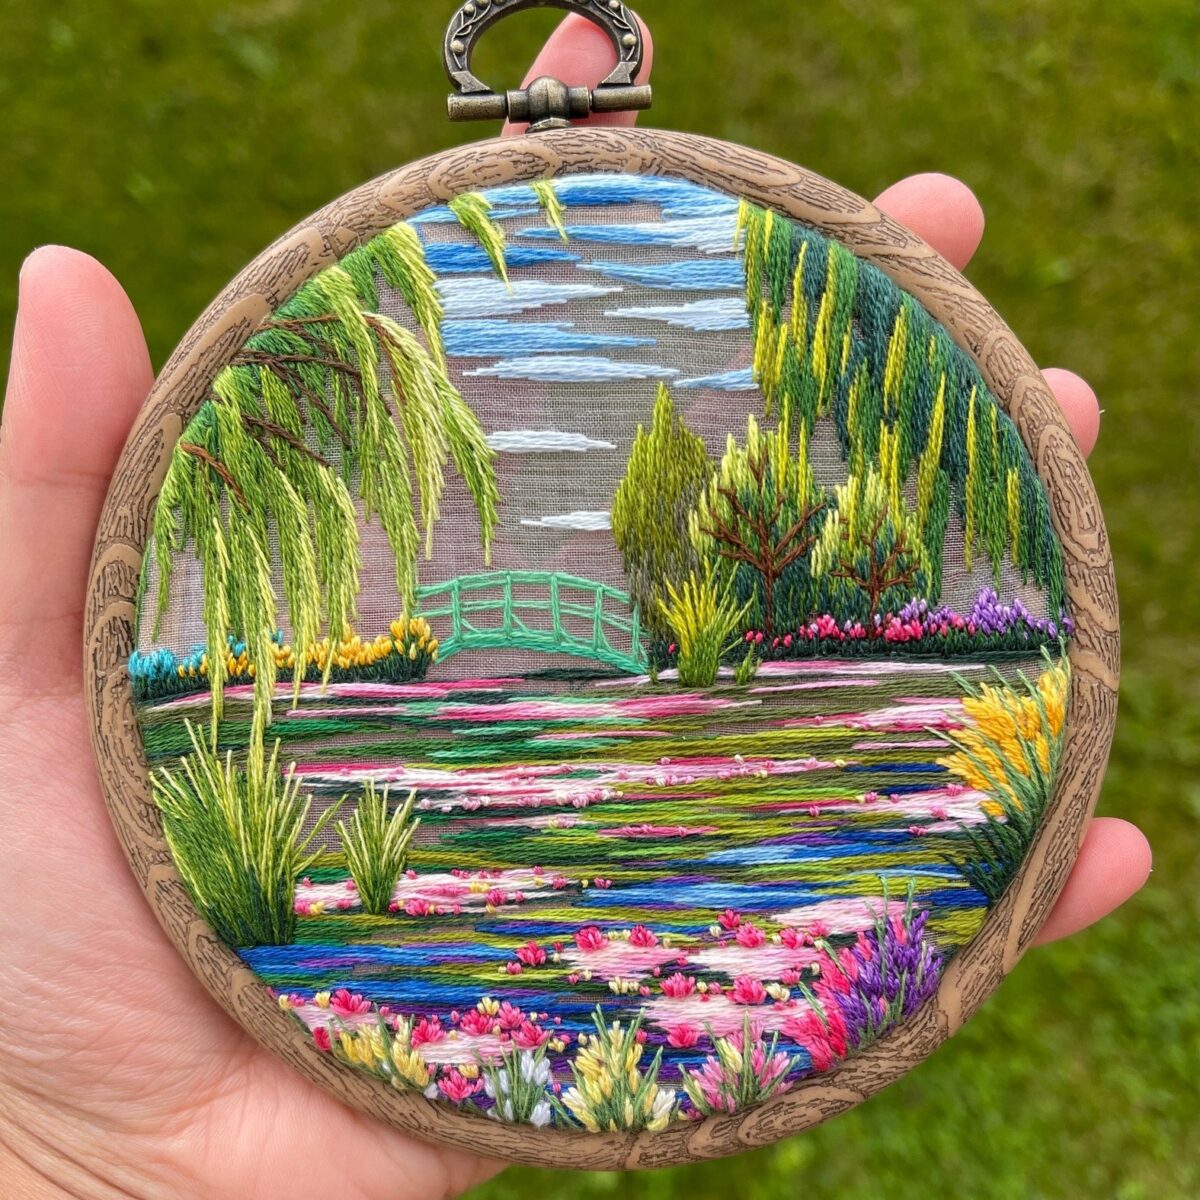 Gorgeous Embroidery Hoop Arts Of Natural Landscapes By Sew Beautiful 8